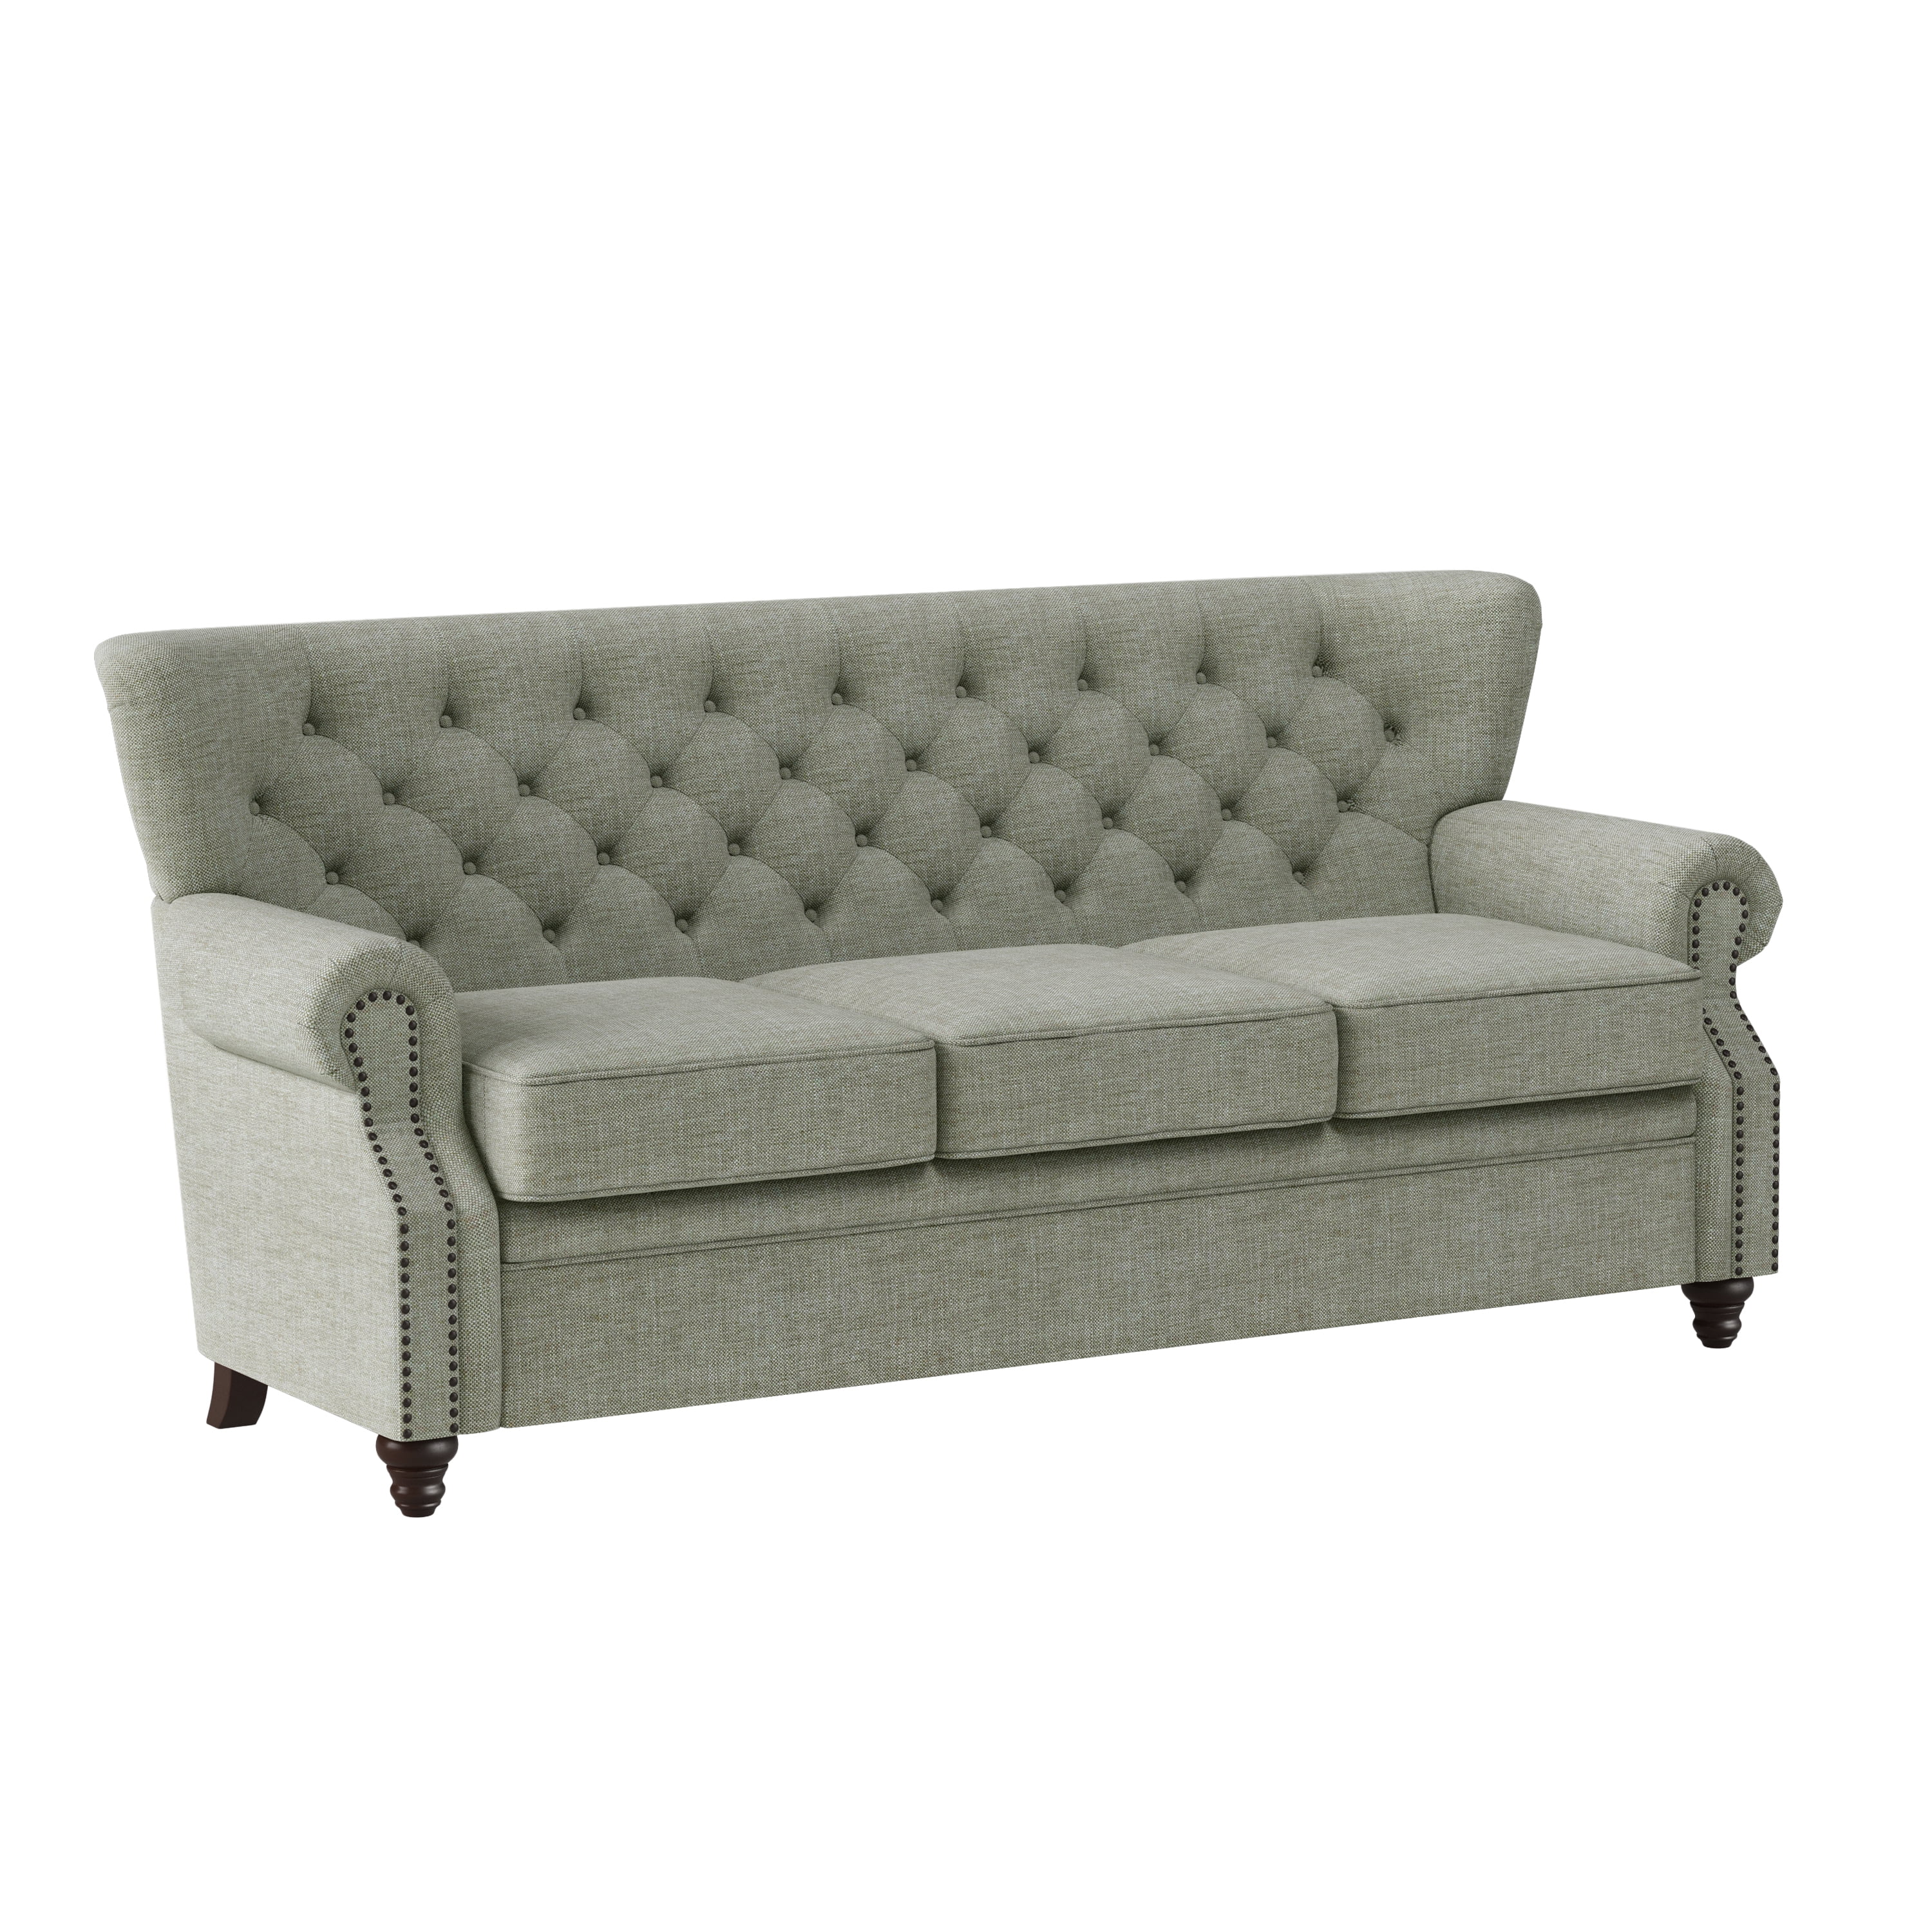 Homesvale Pearse Button Tufted Rolled Arm Sofa in Brushed